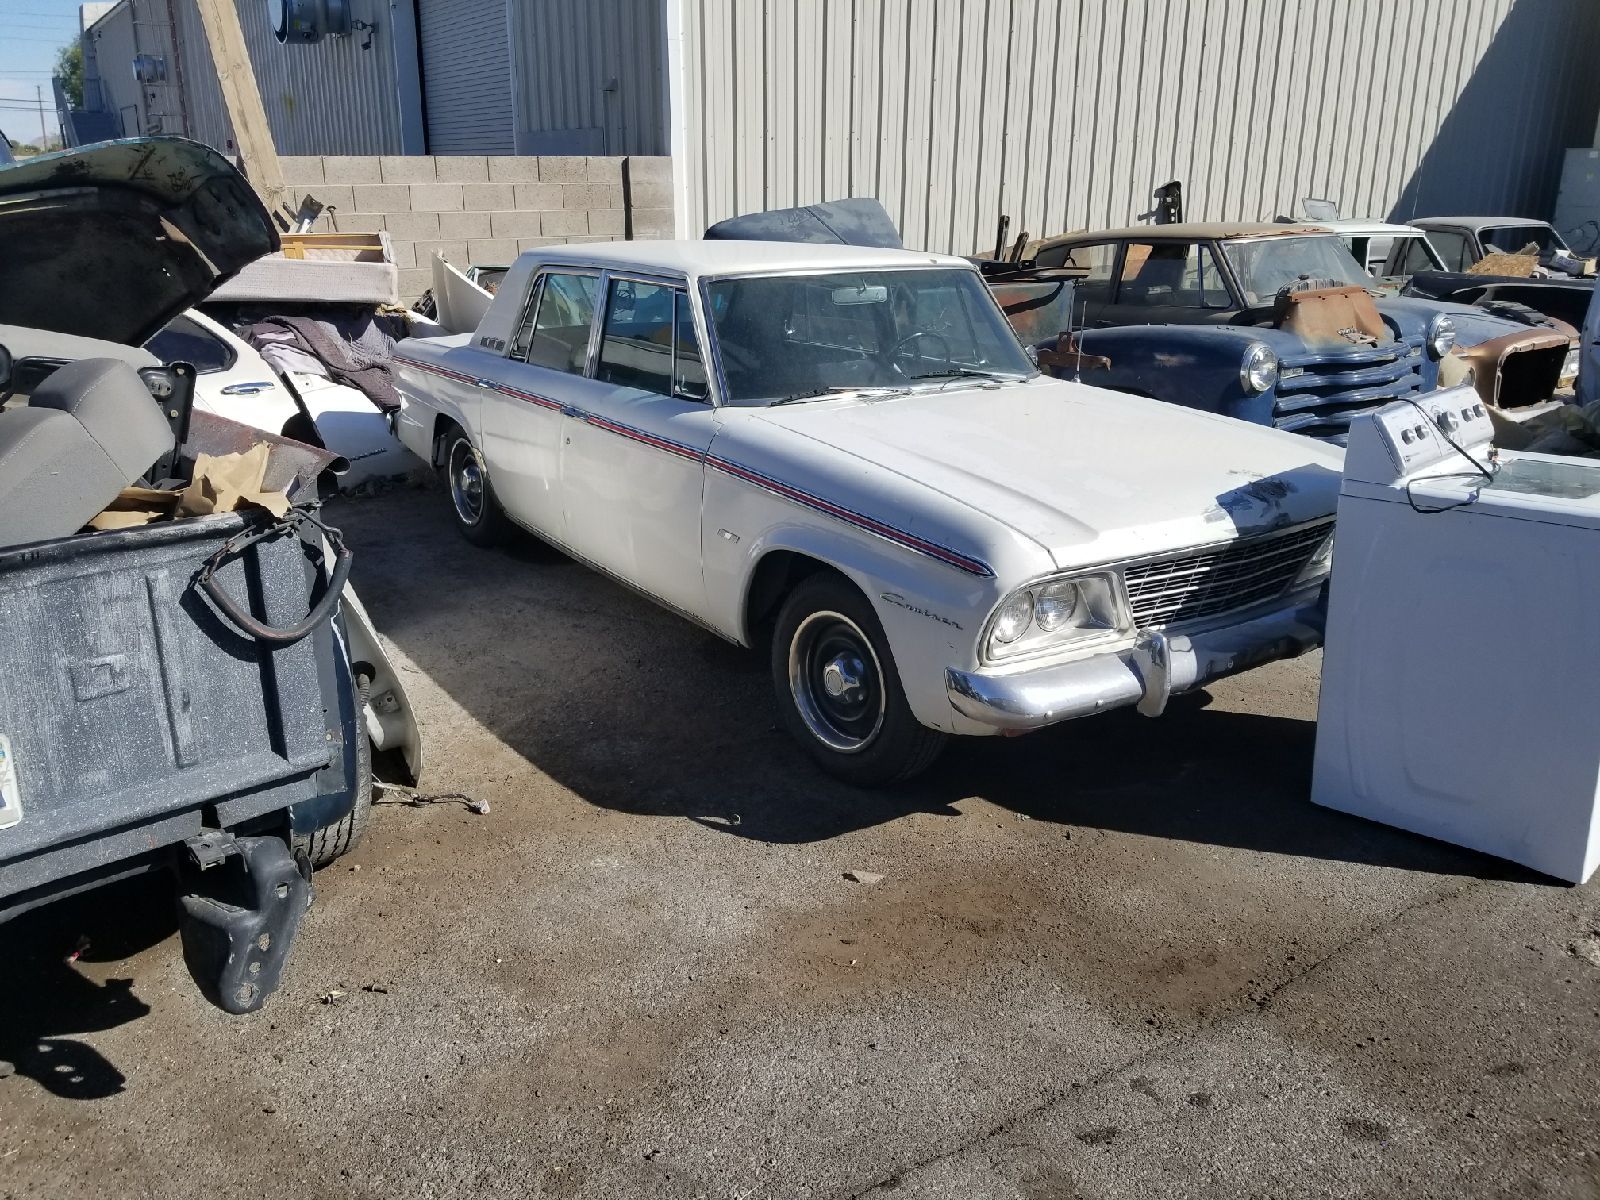 Classic '65 Studebaker Commander for sale or trade!!